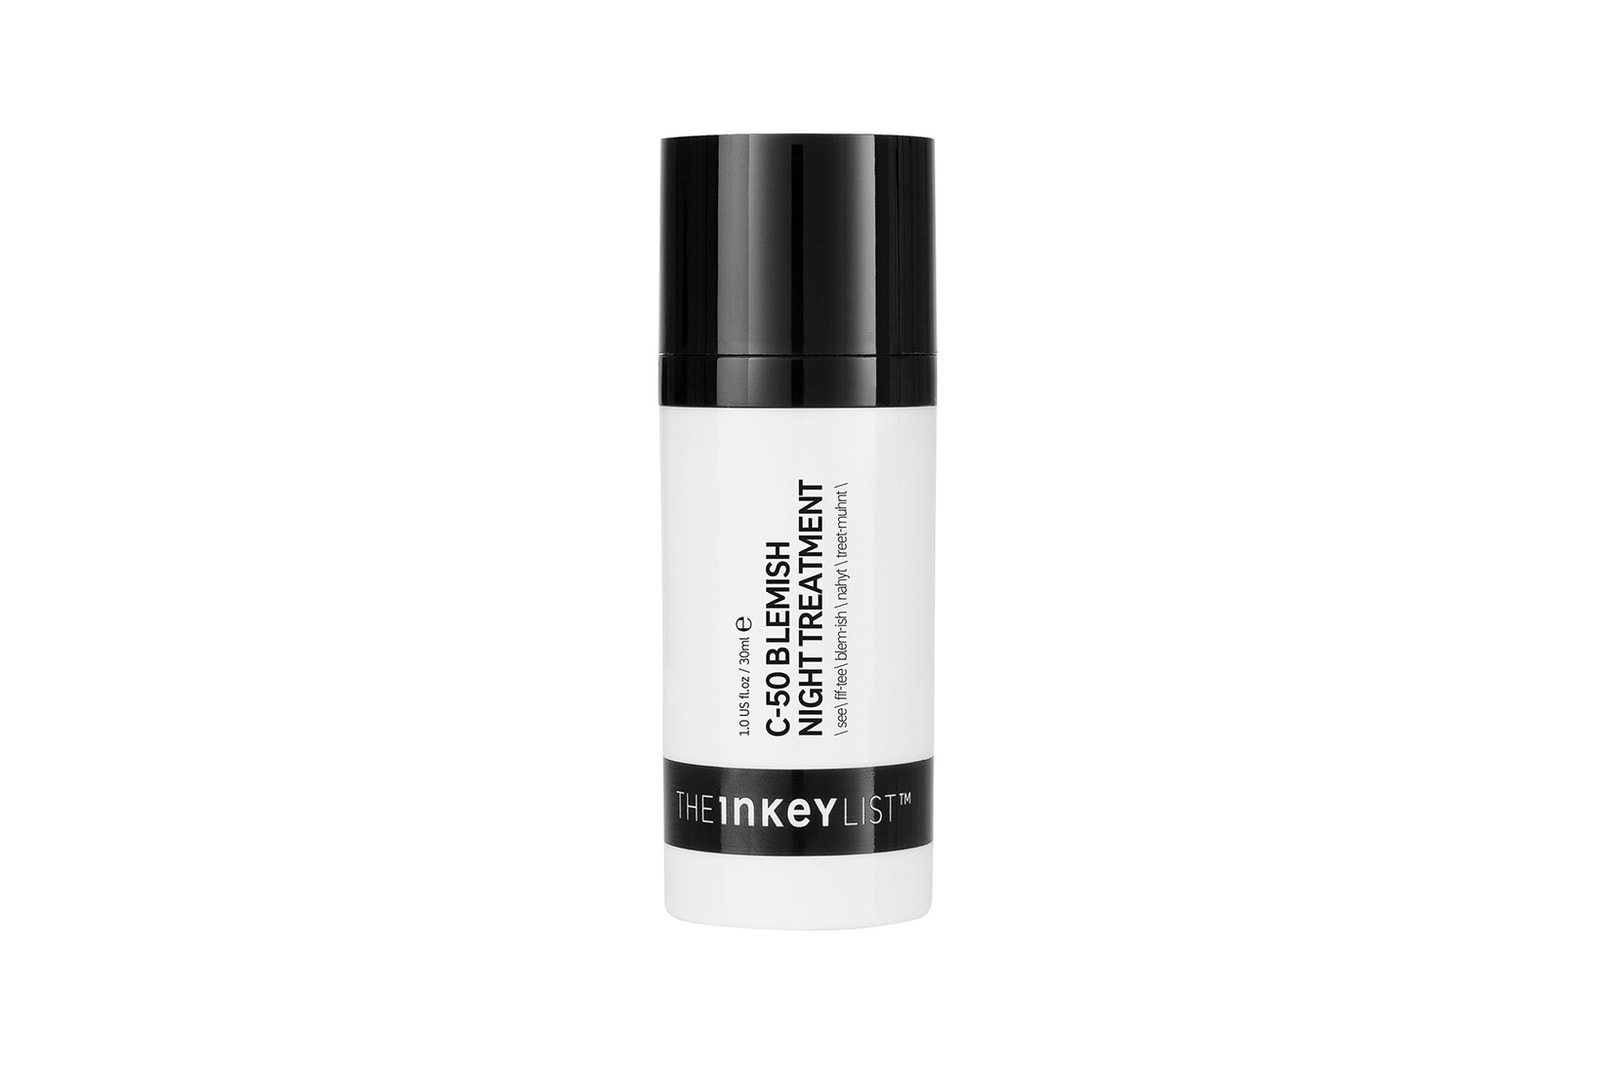 the inkey list skincare clean beauty sustainability moisturizers serums cleansers